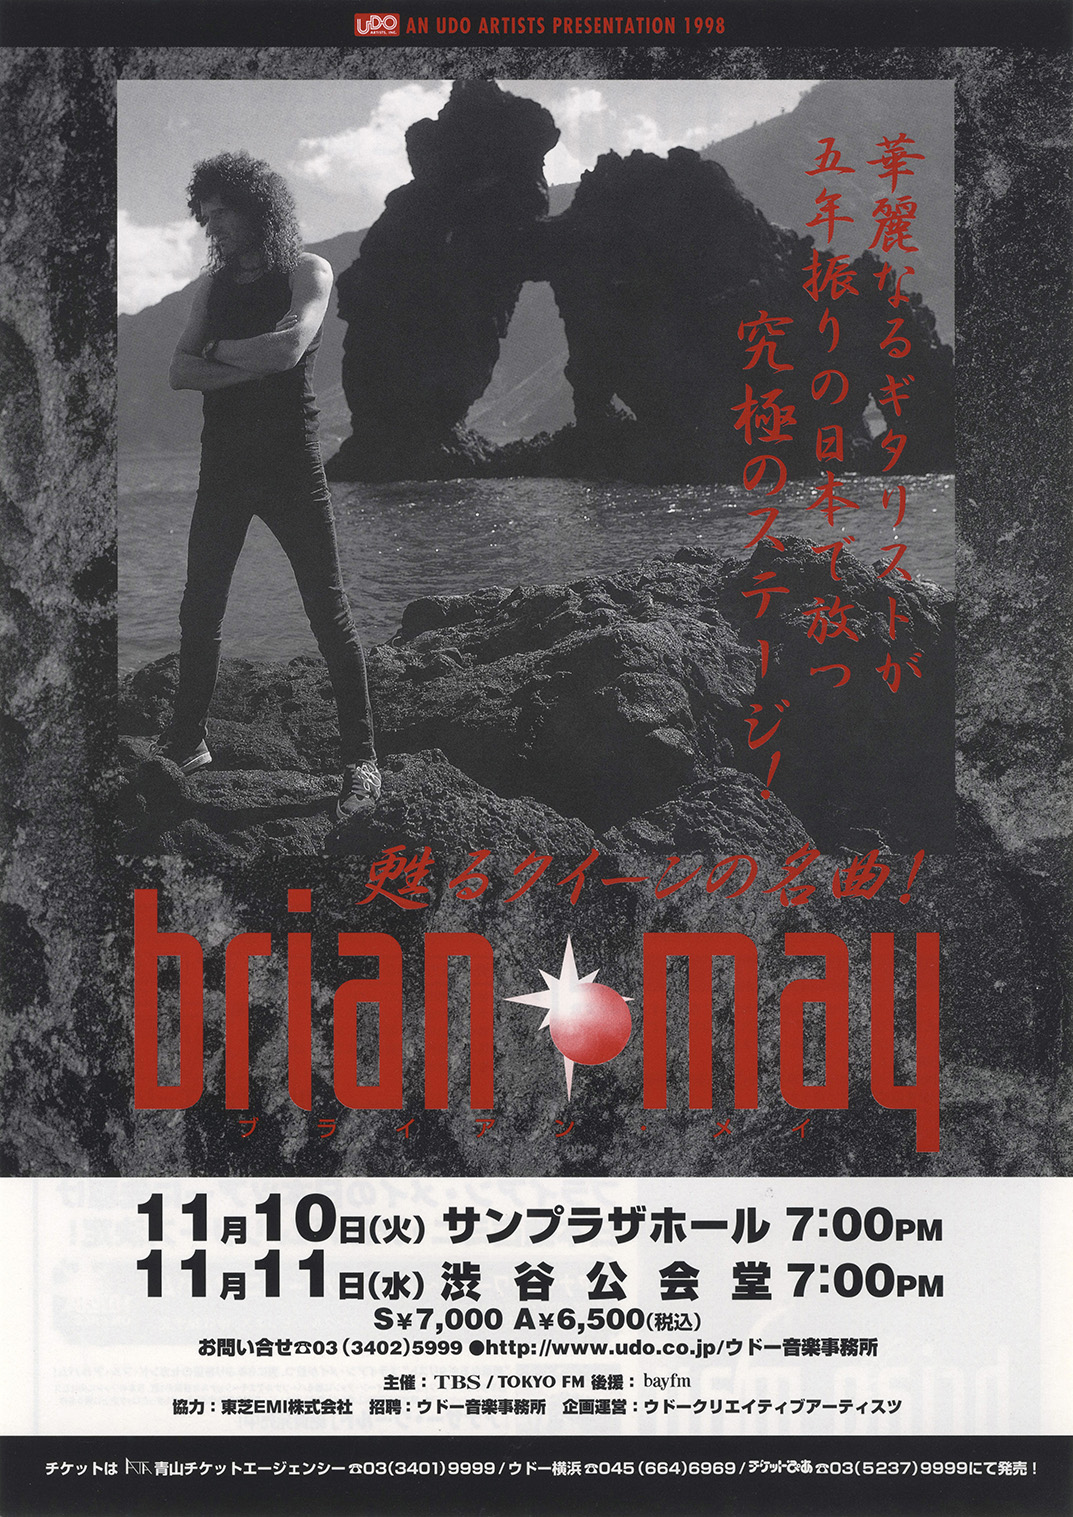 Brian May in Japan in 1998